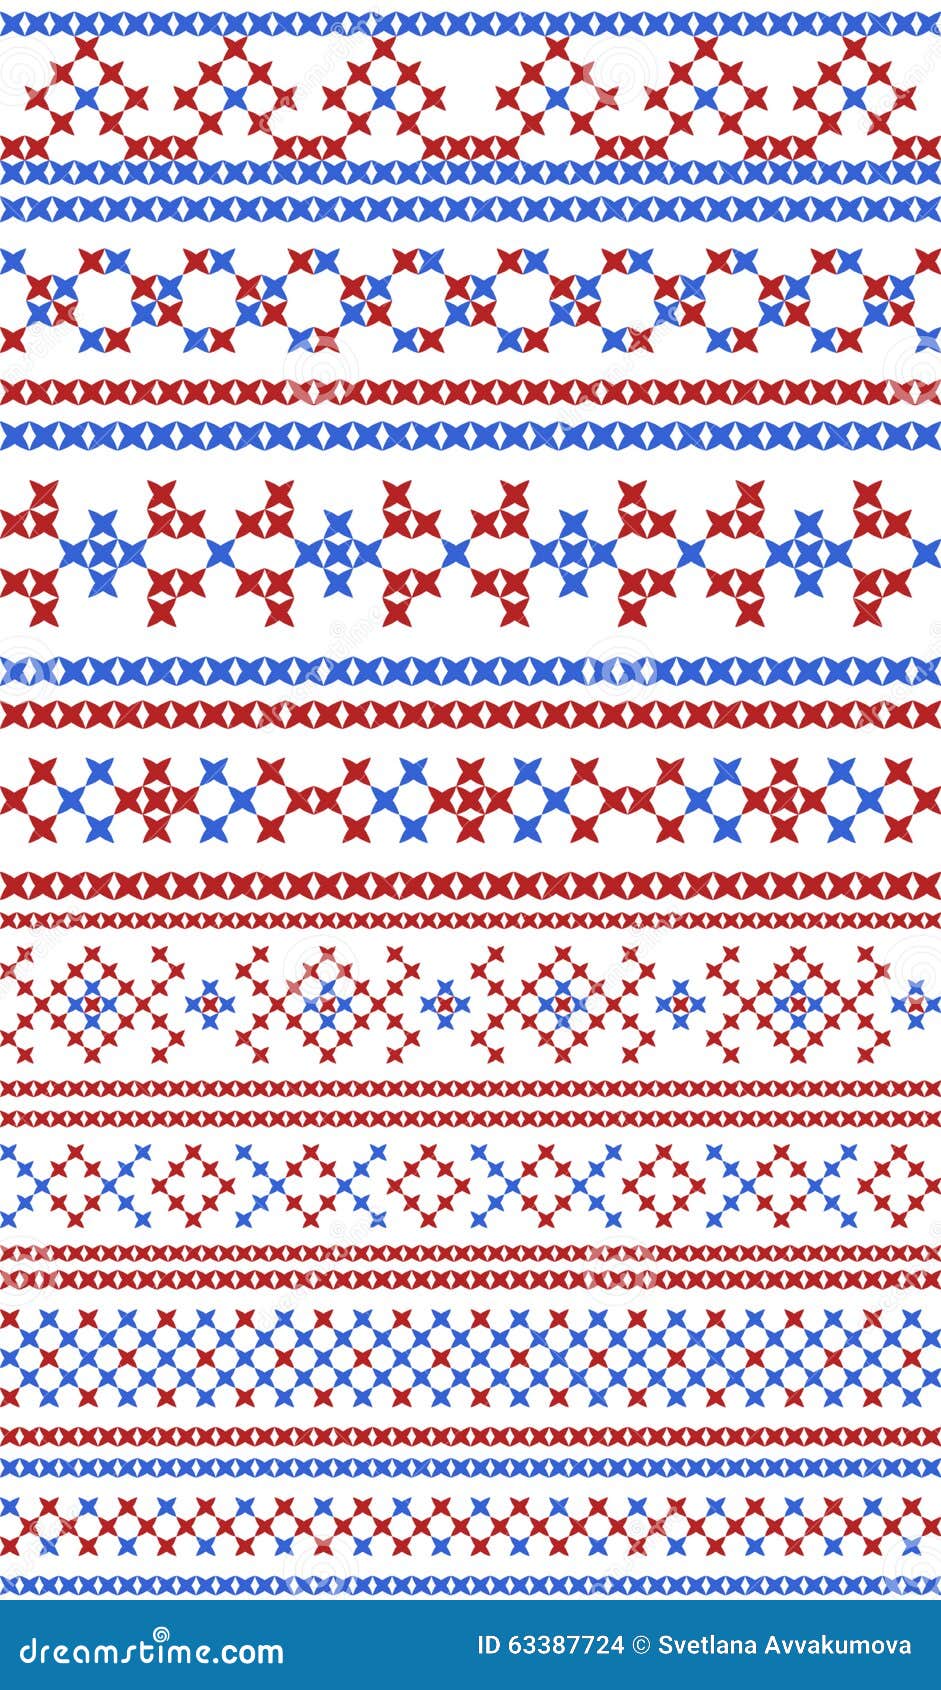 Russian Traditional Seamless Patterns The Cross Stitch Stock Vector Illustration Of Handicraft Element 63387724